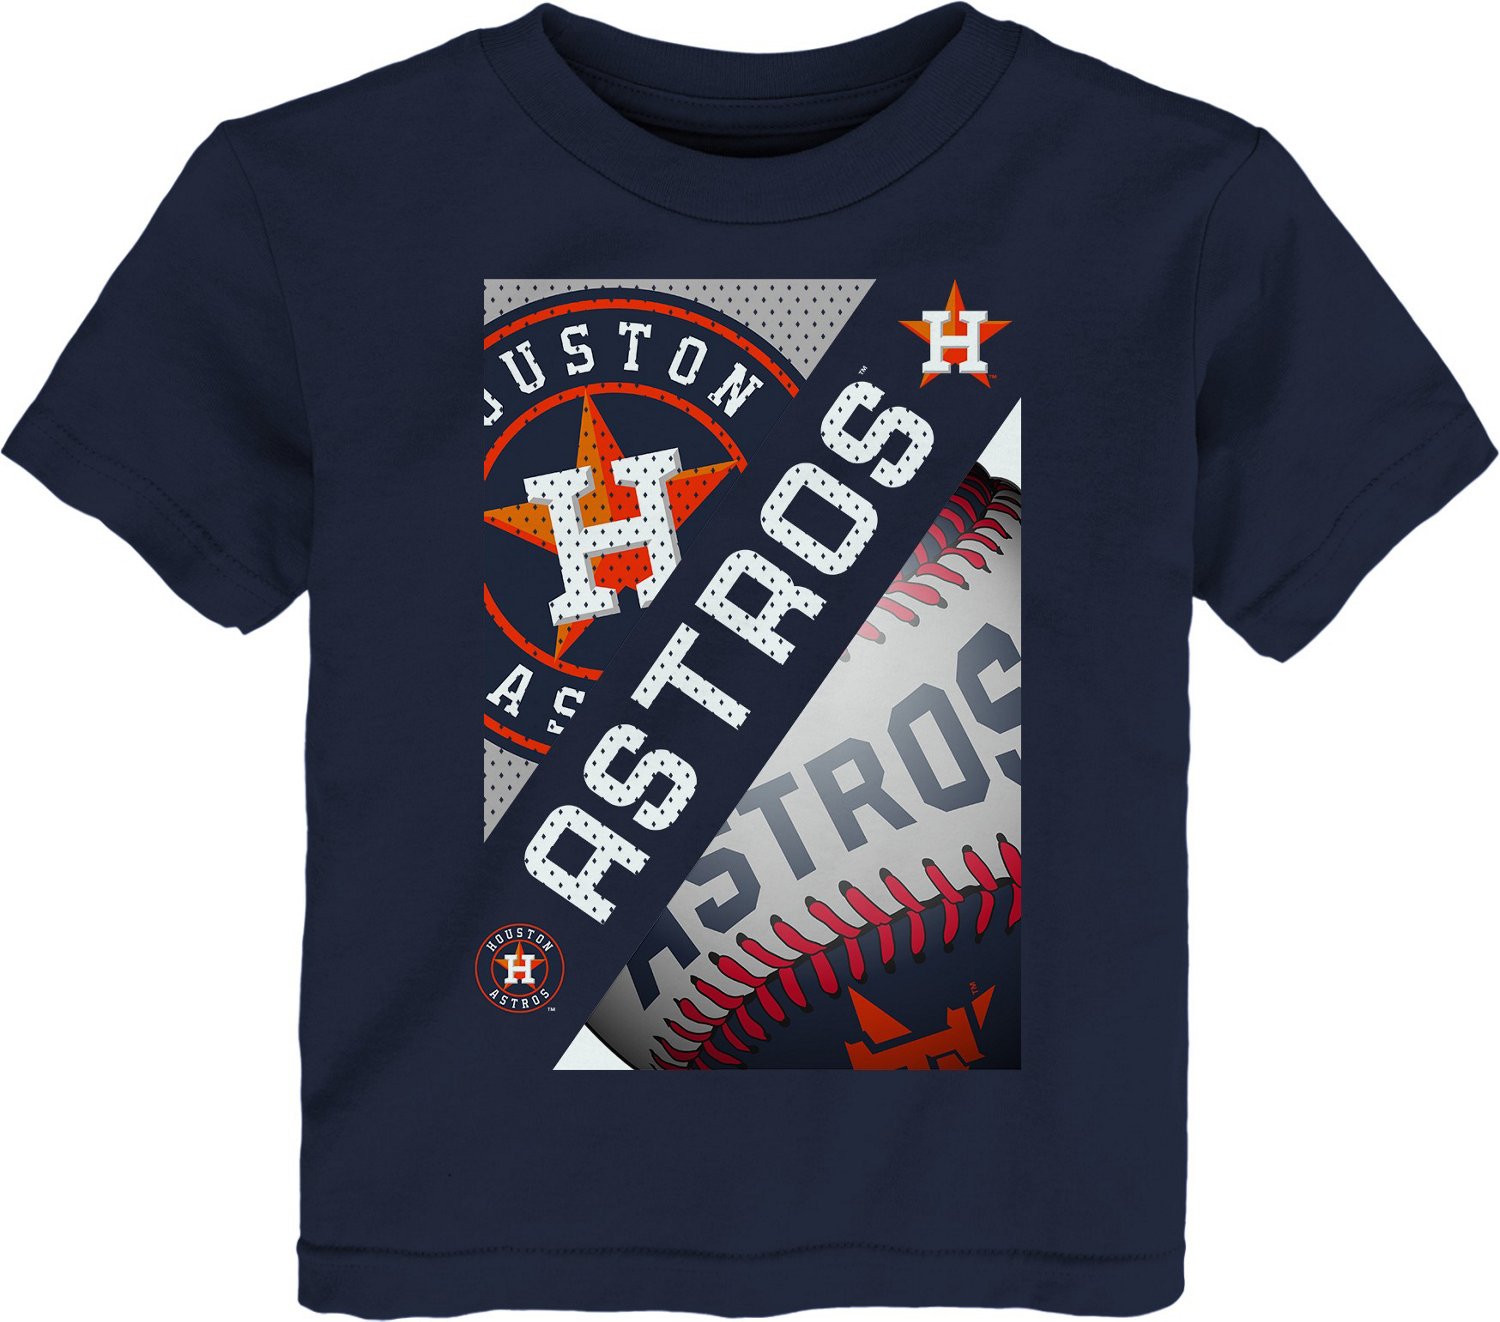 Outerstuff Toddler Boys' Houston Astros Right Fielder Graphic T-shirt